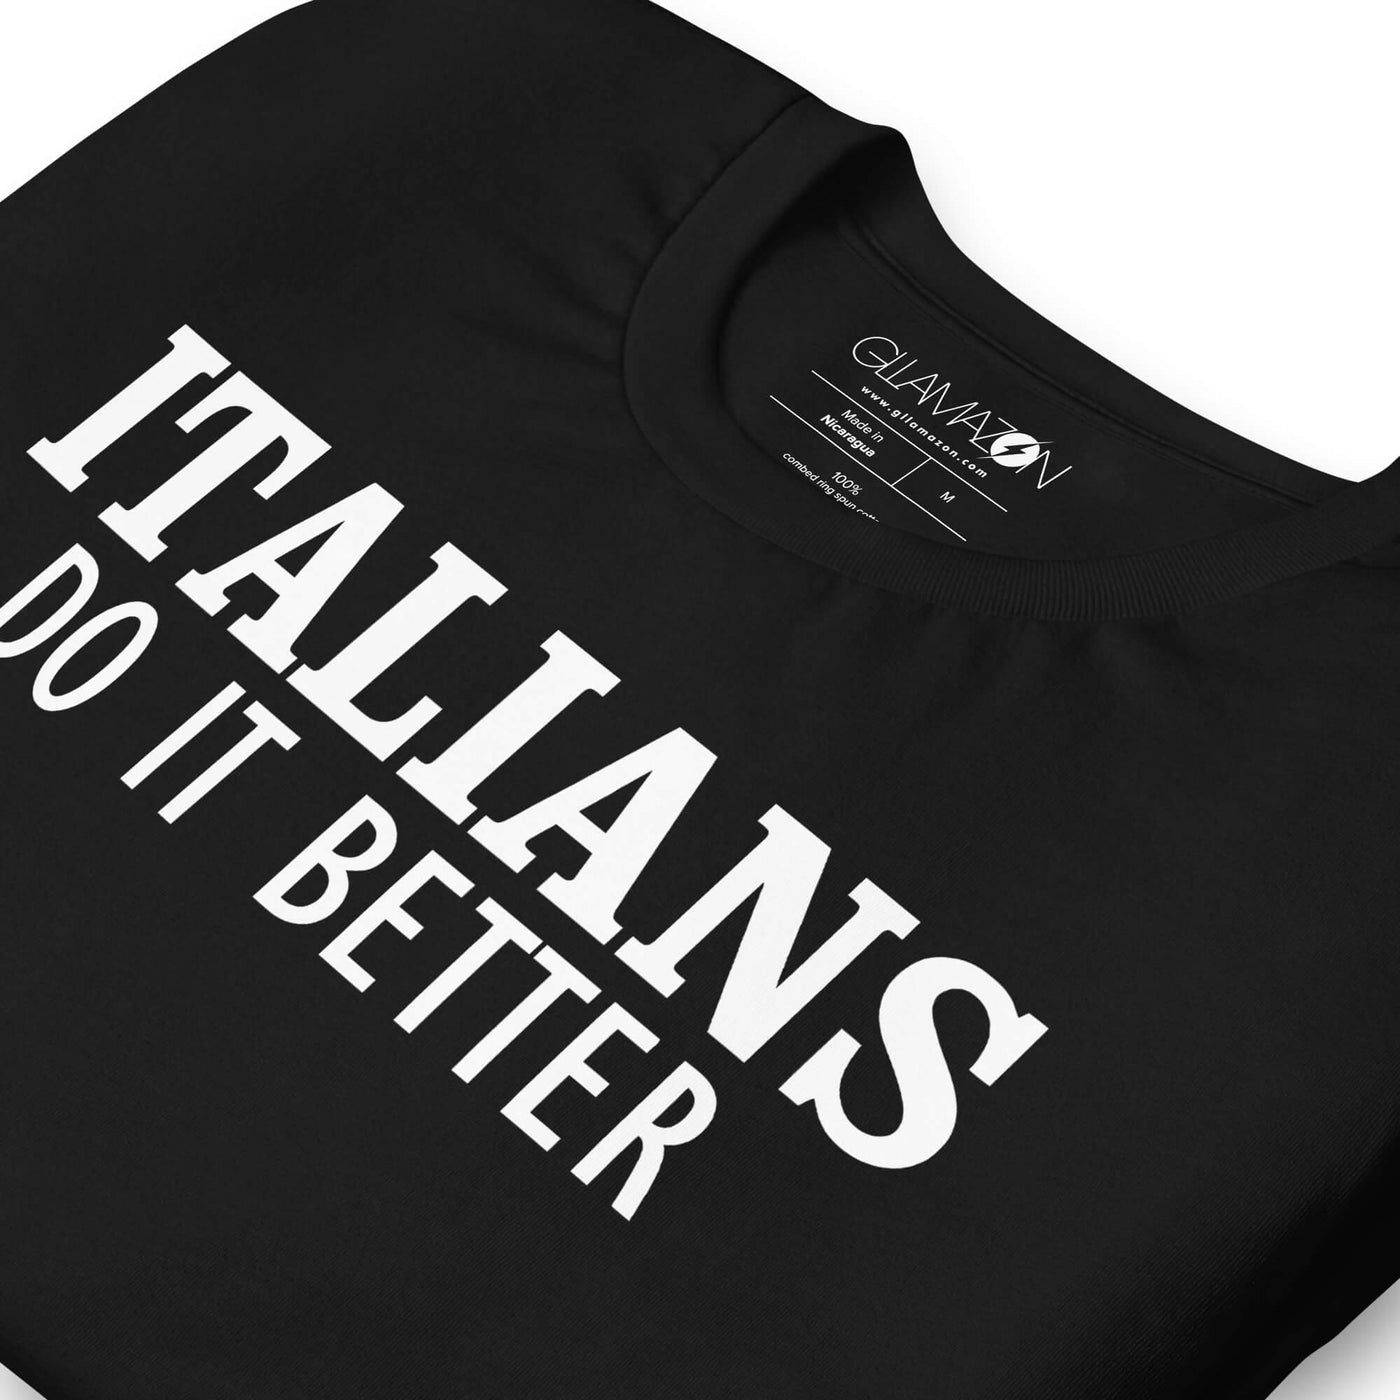 Shop Gllamazon's Italians Do It Better T-shirt, a replica of the iconic black T-shirt worn by Madonna on the set of her "Papa Don't Preach" music video in 1986.